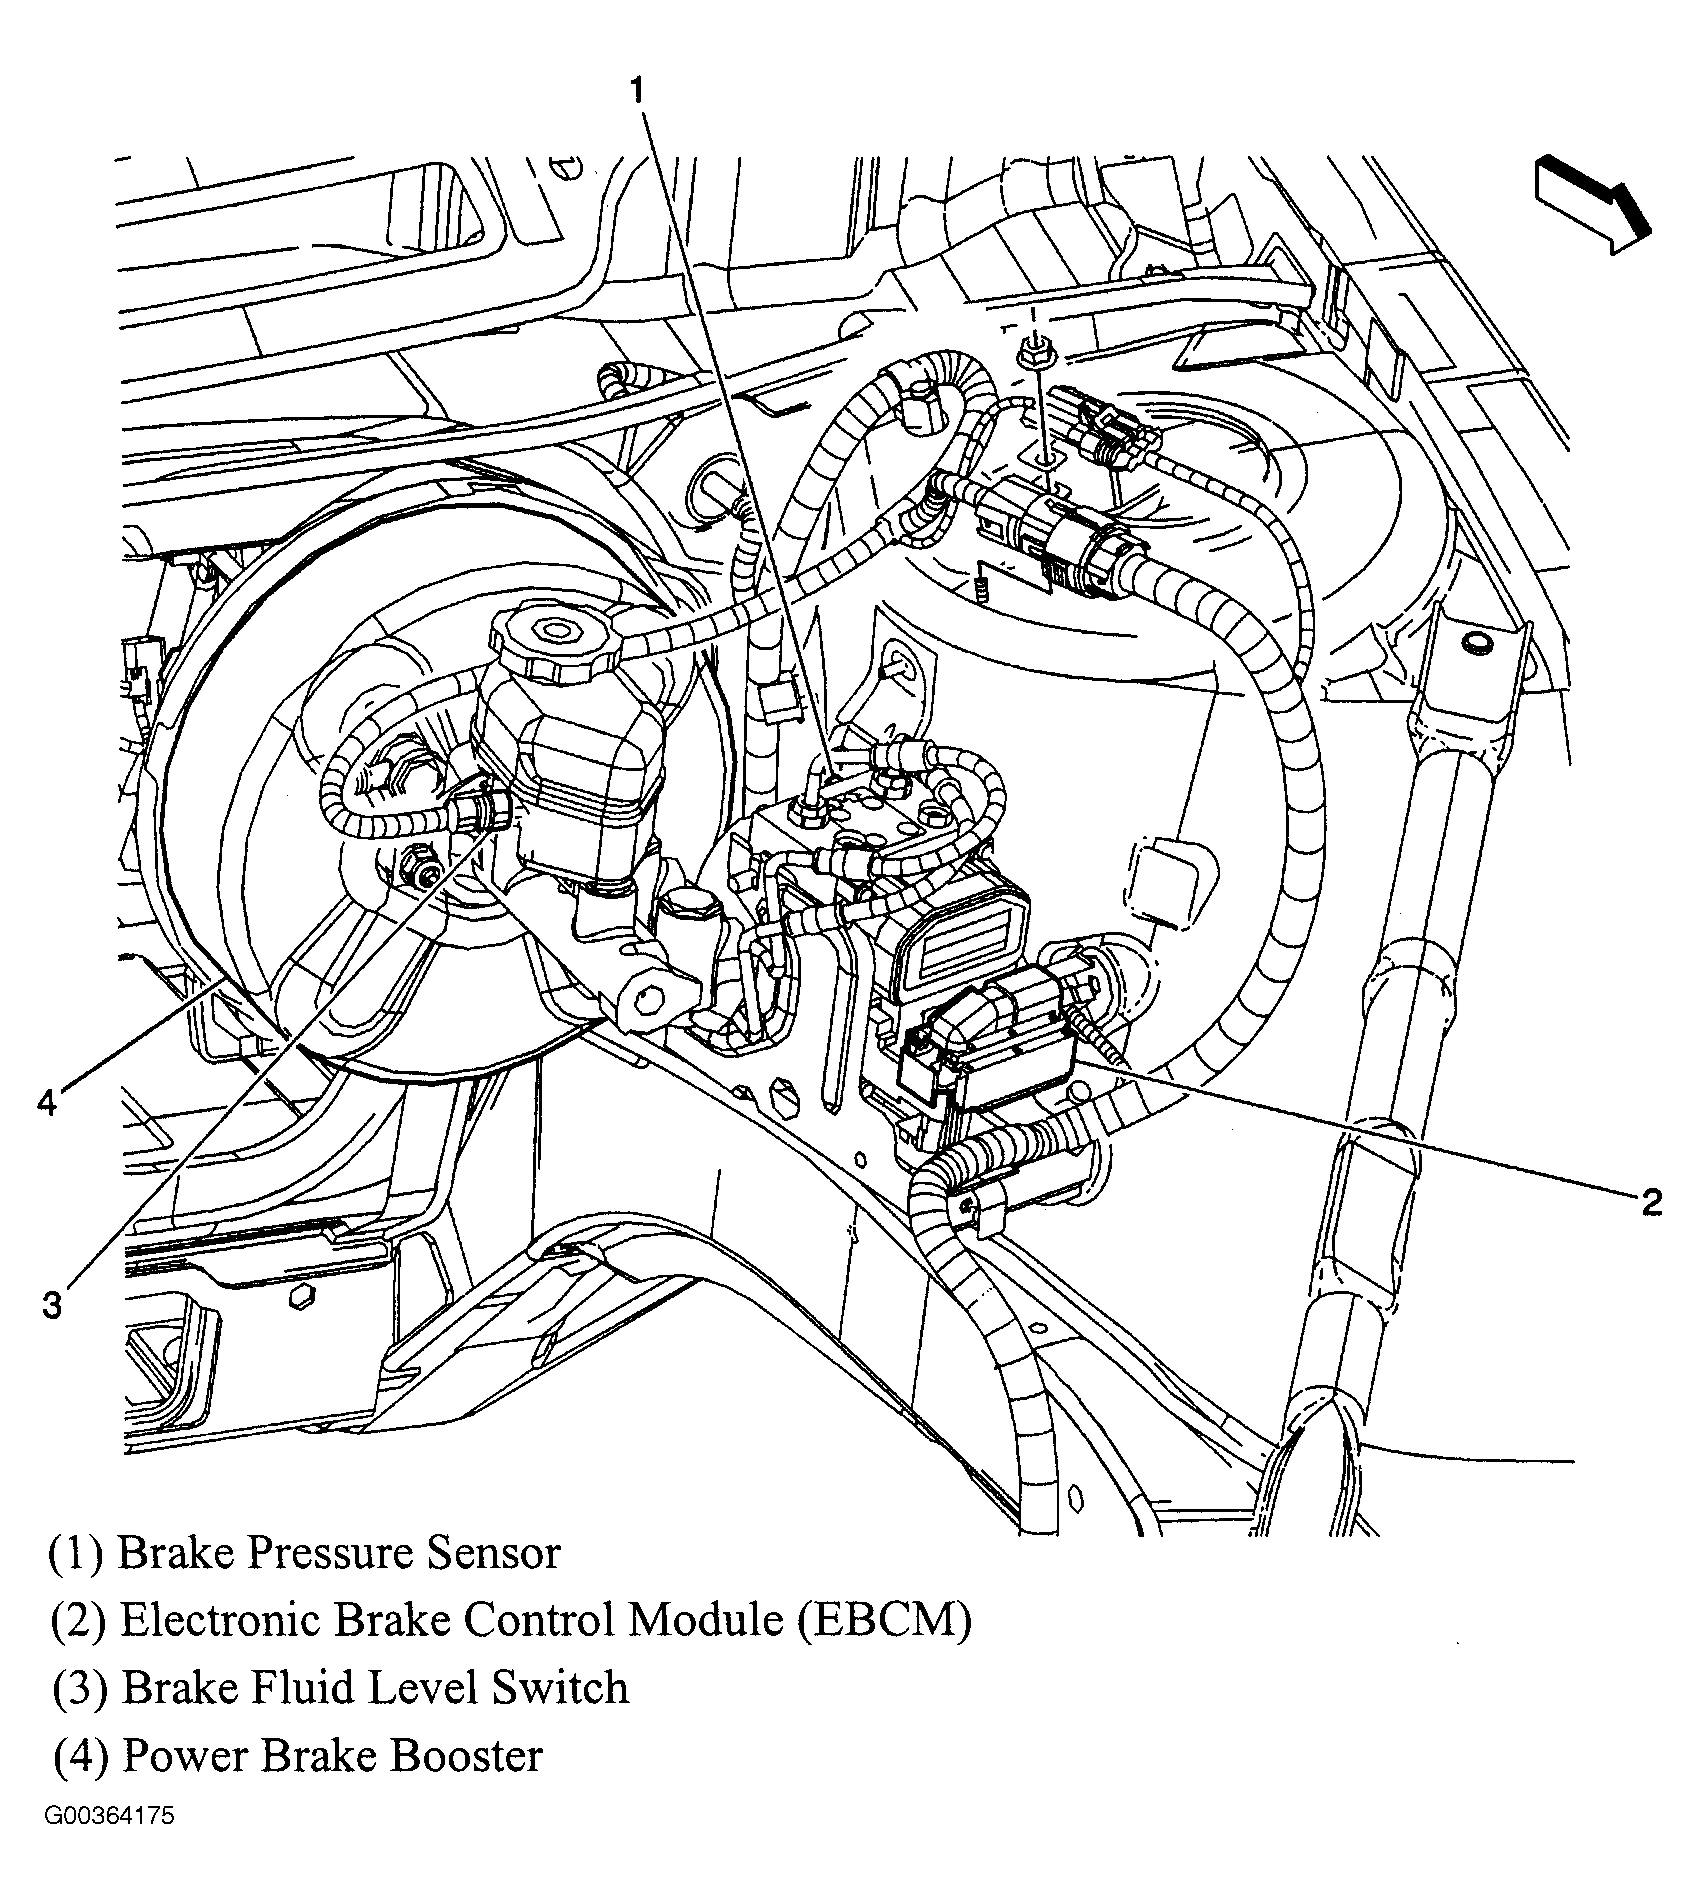 Buick LaCrosse CXL 2006 - Component Locations -  Left Rear Of Engine Compartment